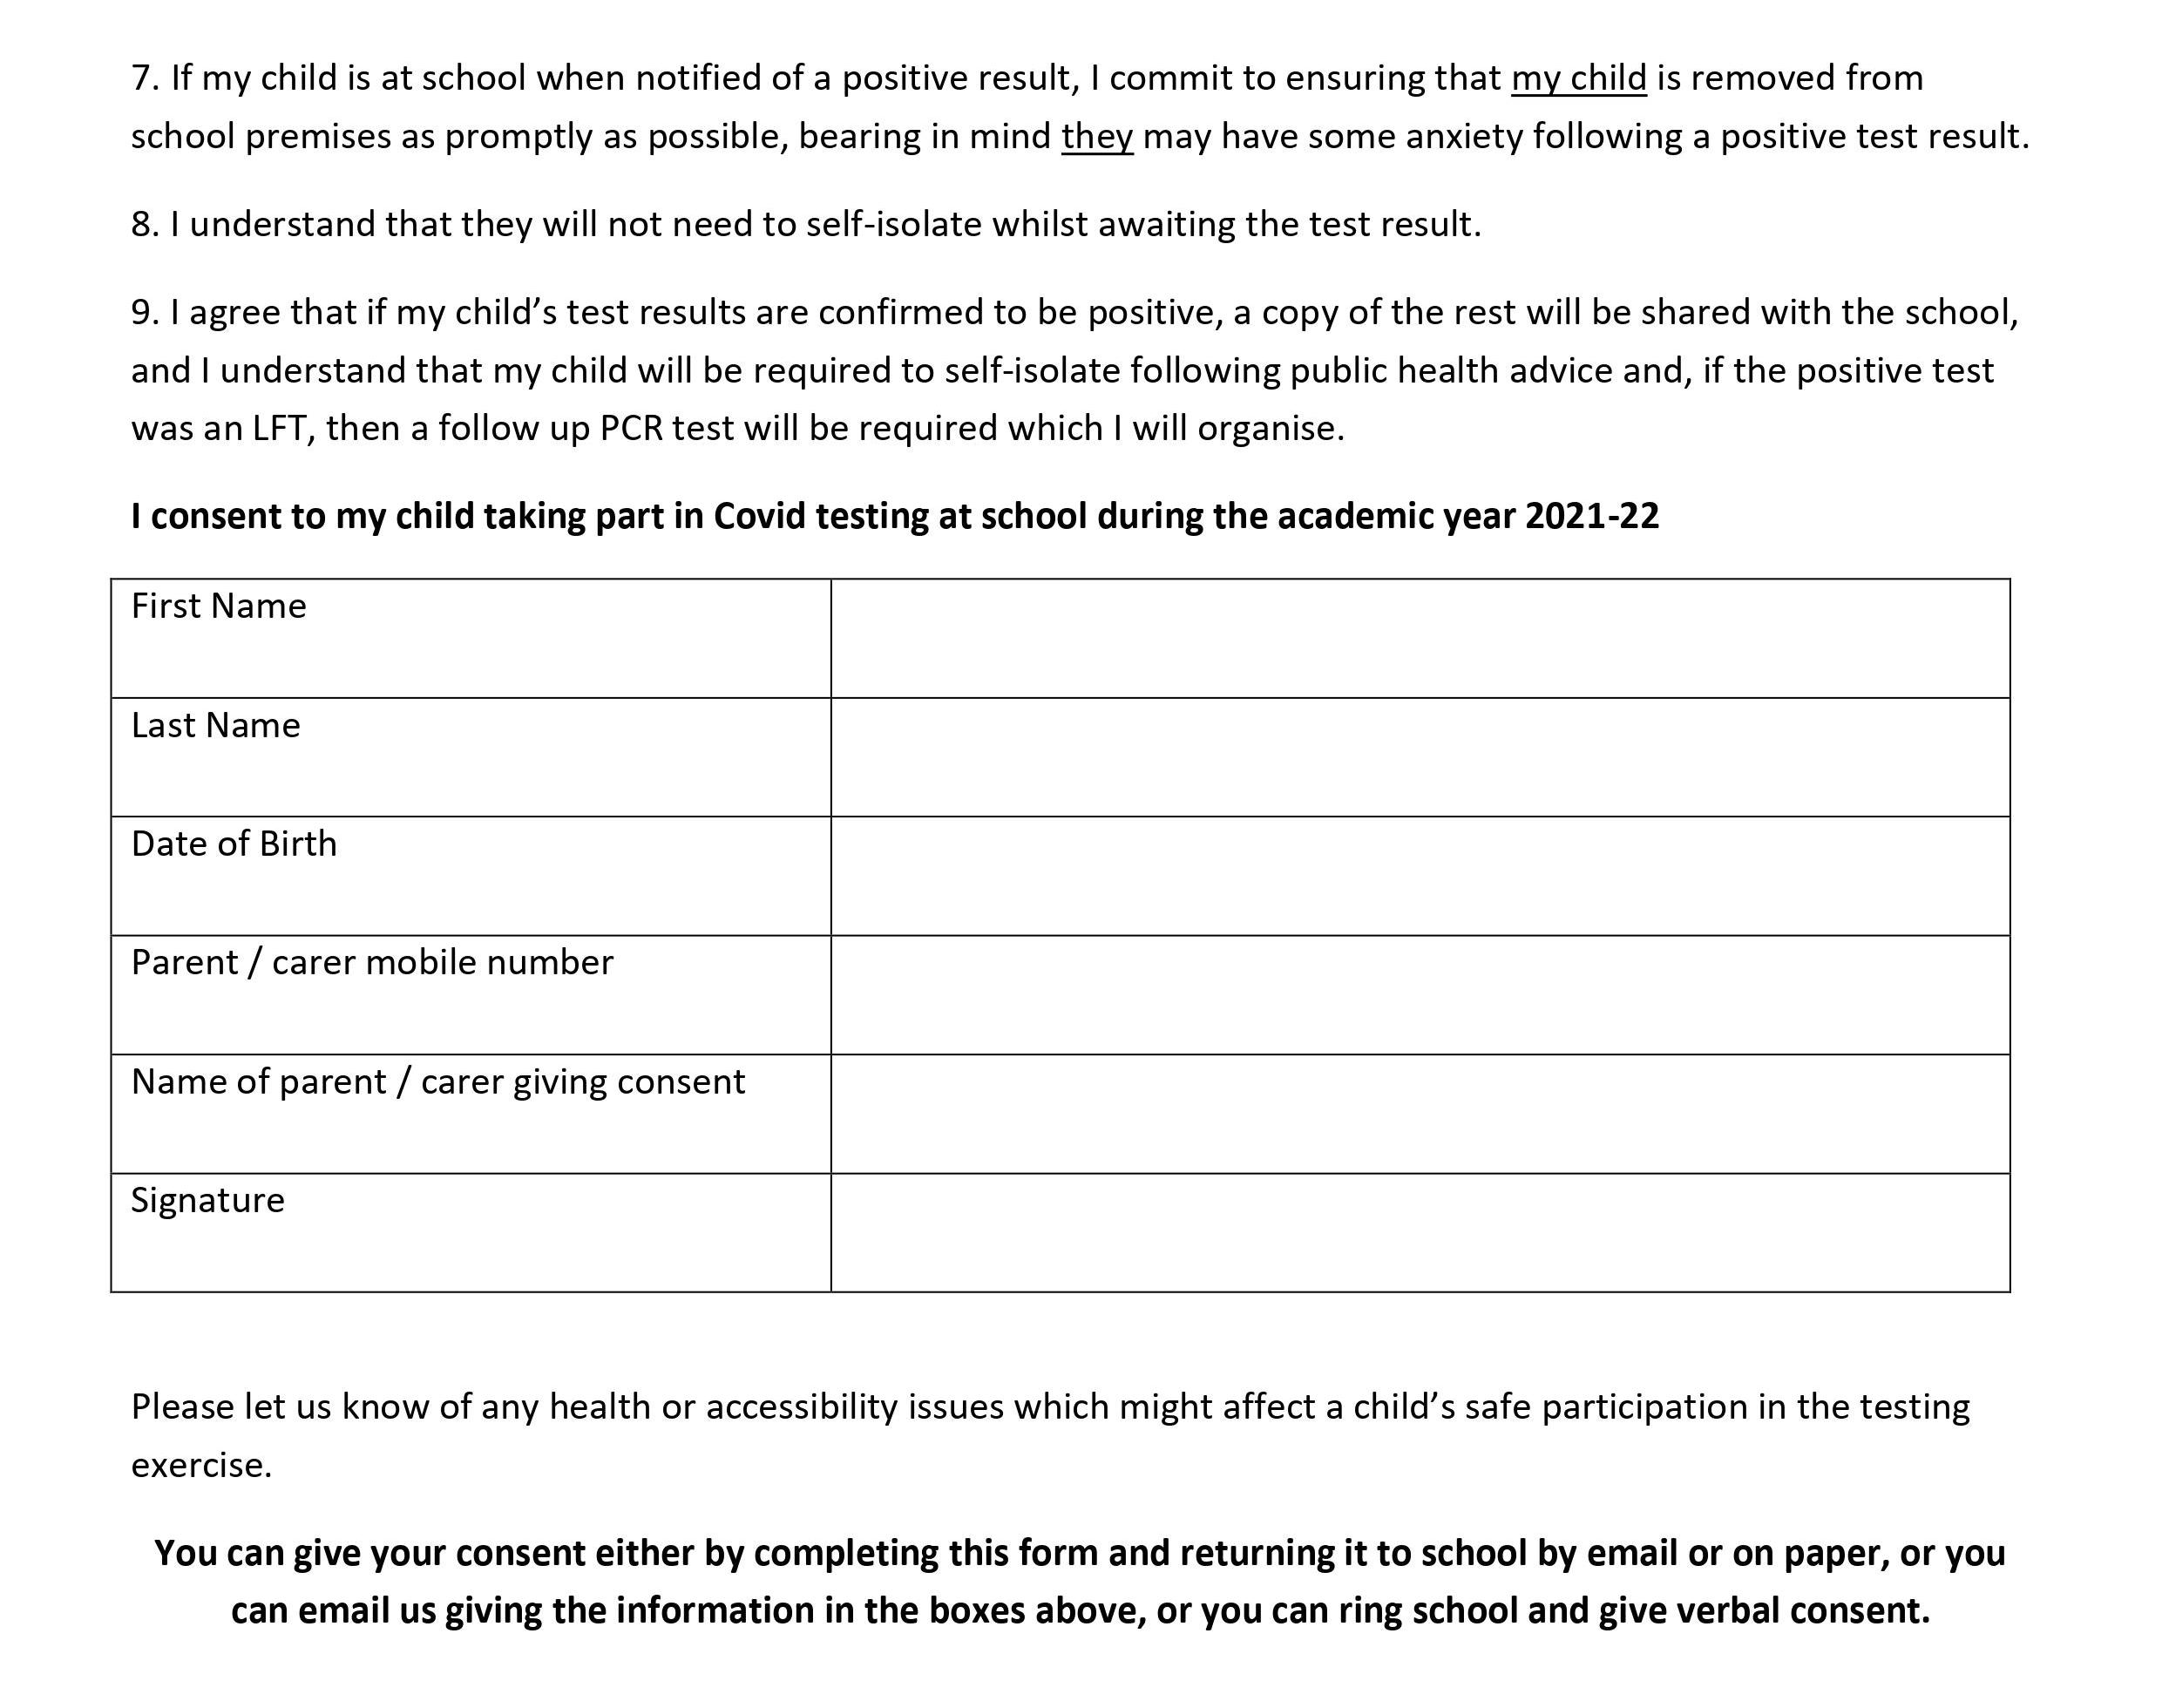 Consent form Y7 August 2021 page 2